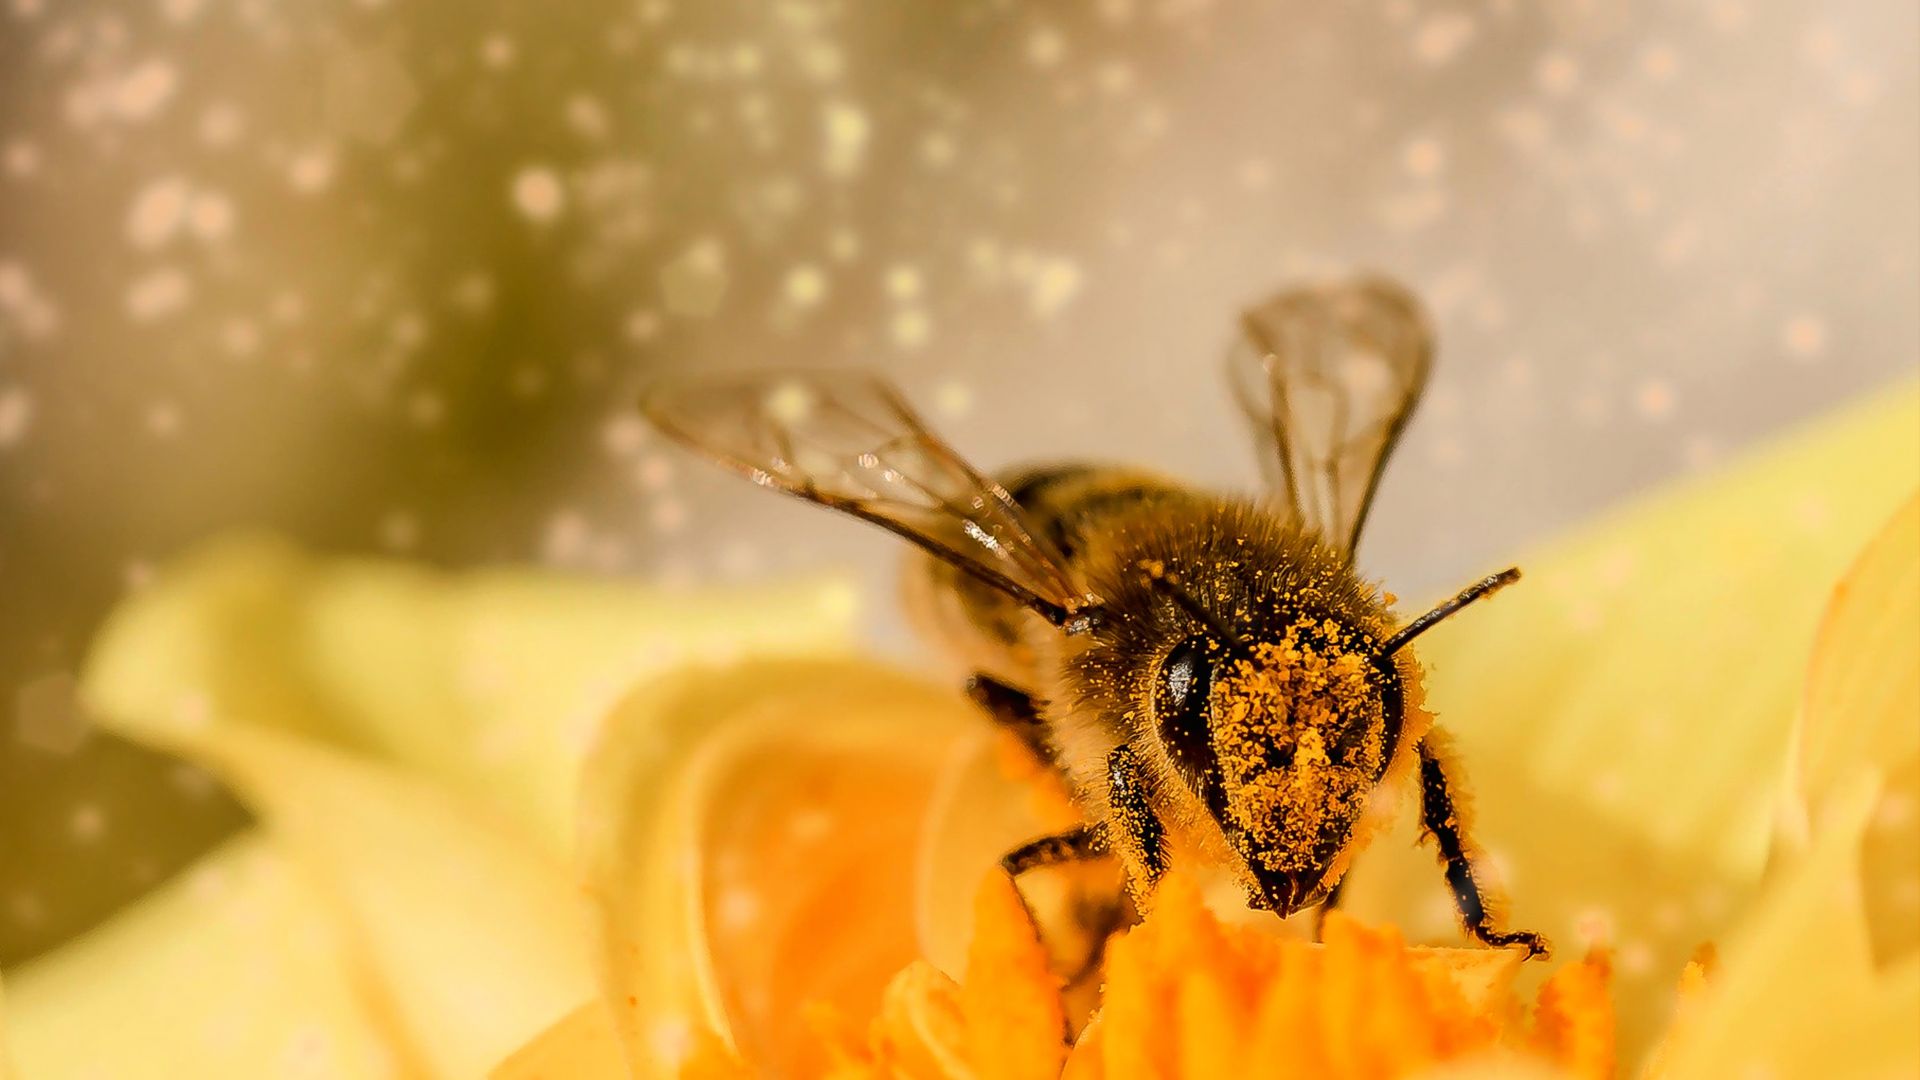 Revolutionary Research Reveals Why Bees Are Making Less Honey